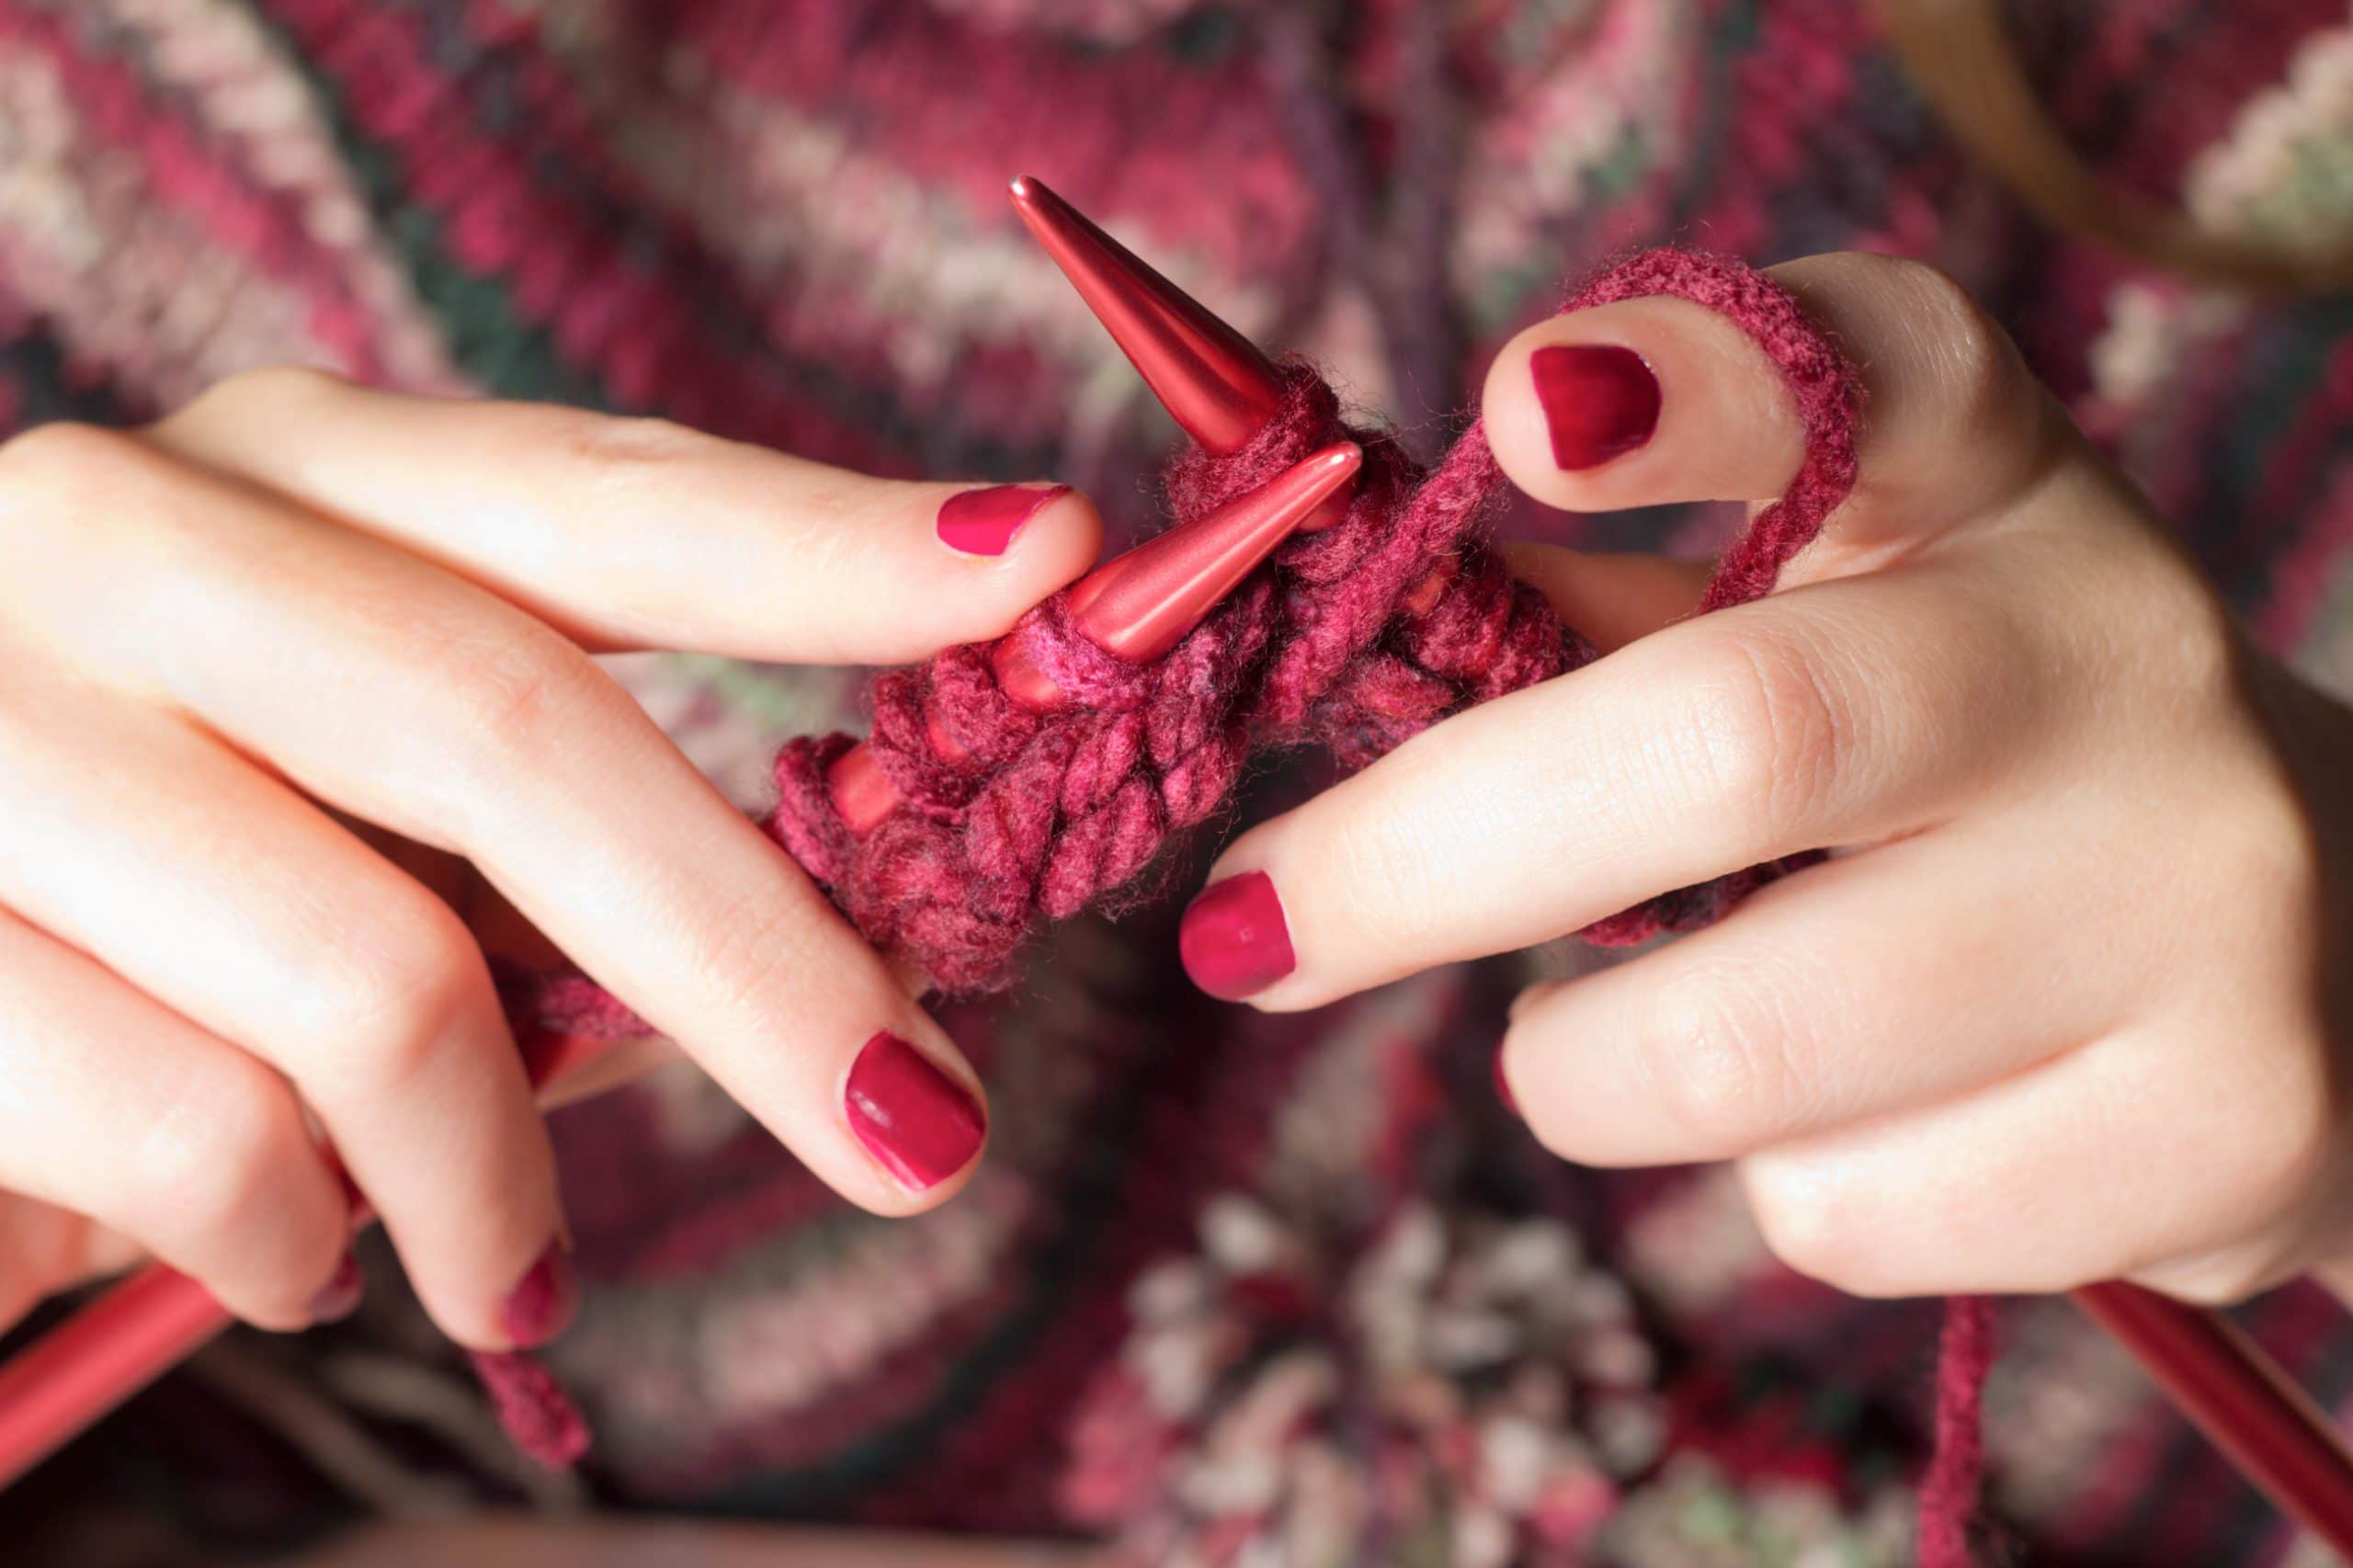 Two hands can be seen holding fuscia knitting needs that match their thread and finger nails. They are working on what looks to be the beginning of a project.